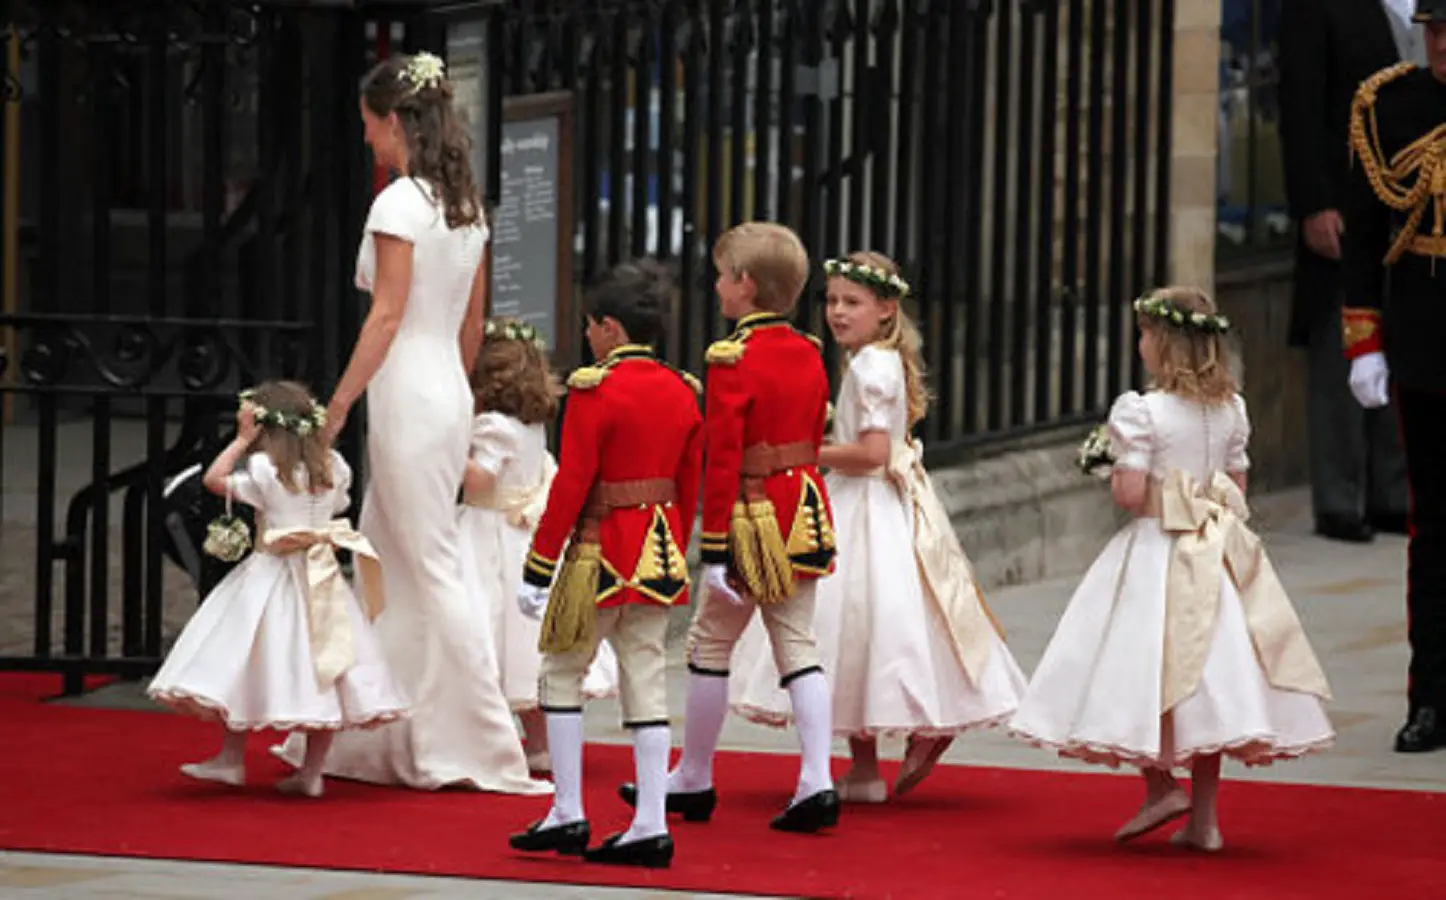 Bridal Party arriving at the Westminster abbey on the wedding of Prince William and Kate Middleton